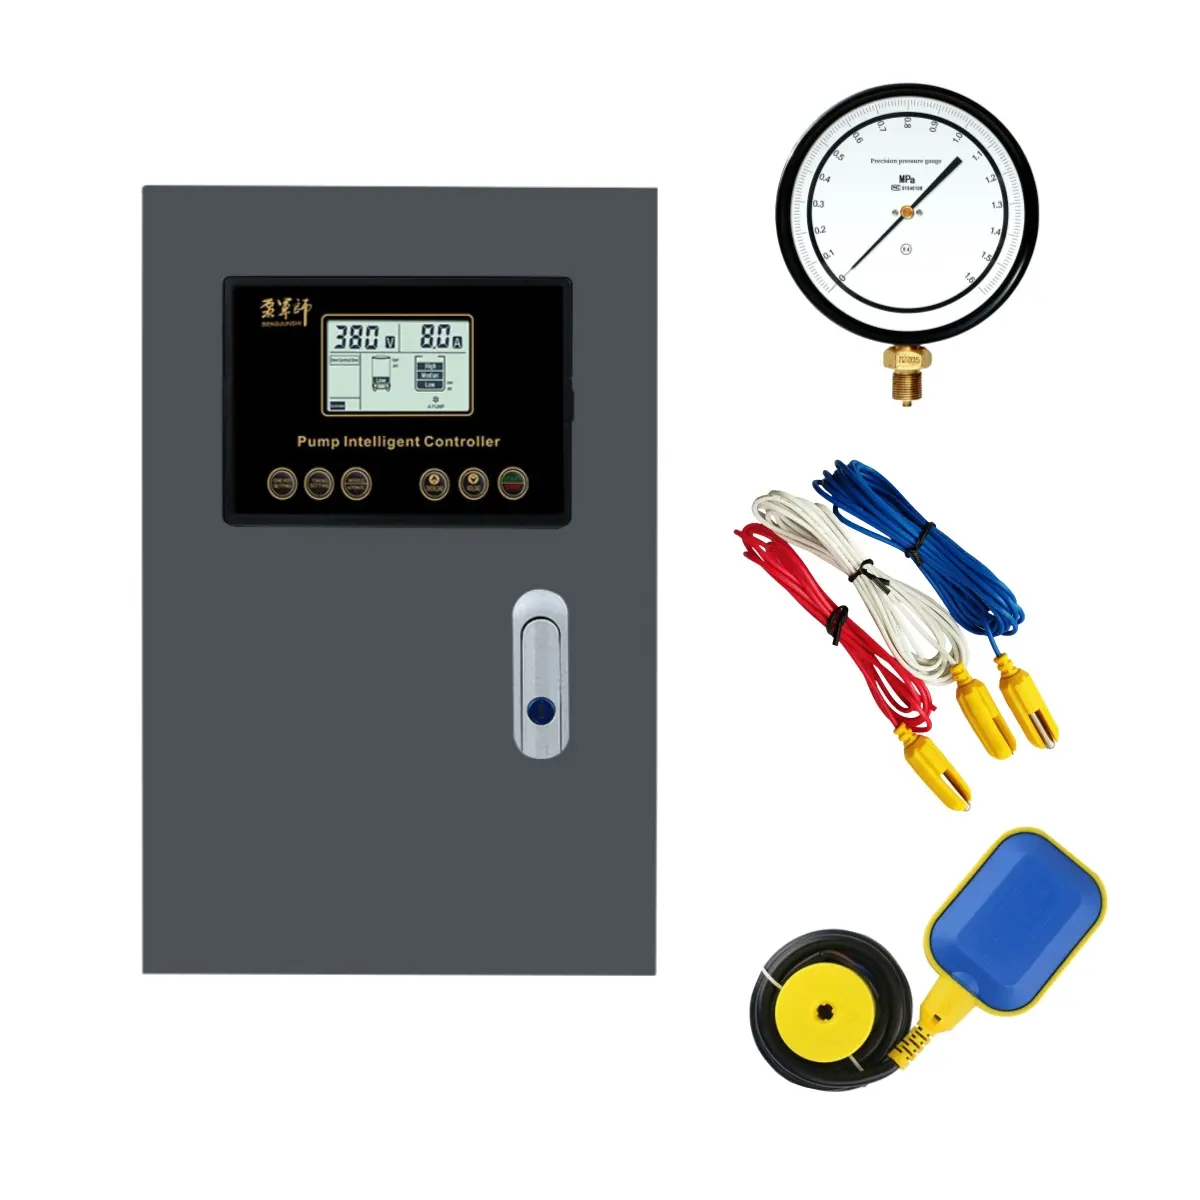 engineering type 3-Phase water pump automatic control steel box with LCD display to control single pump